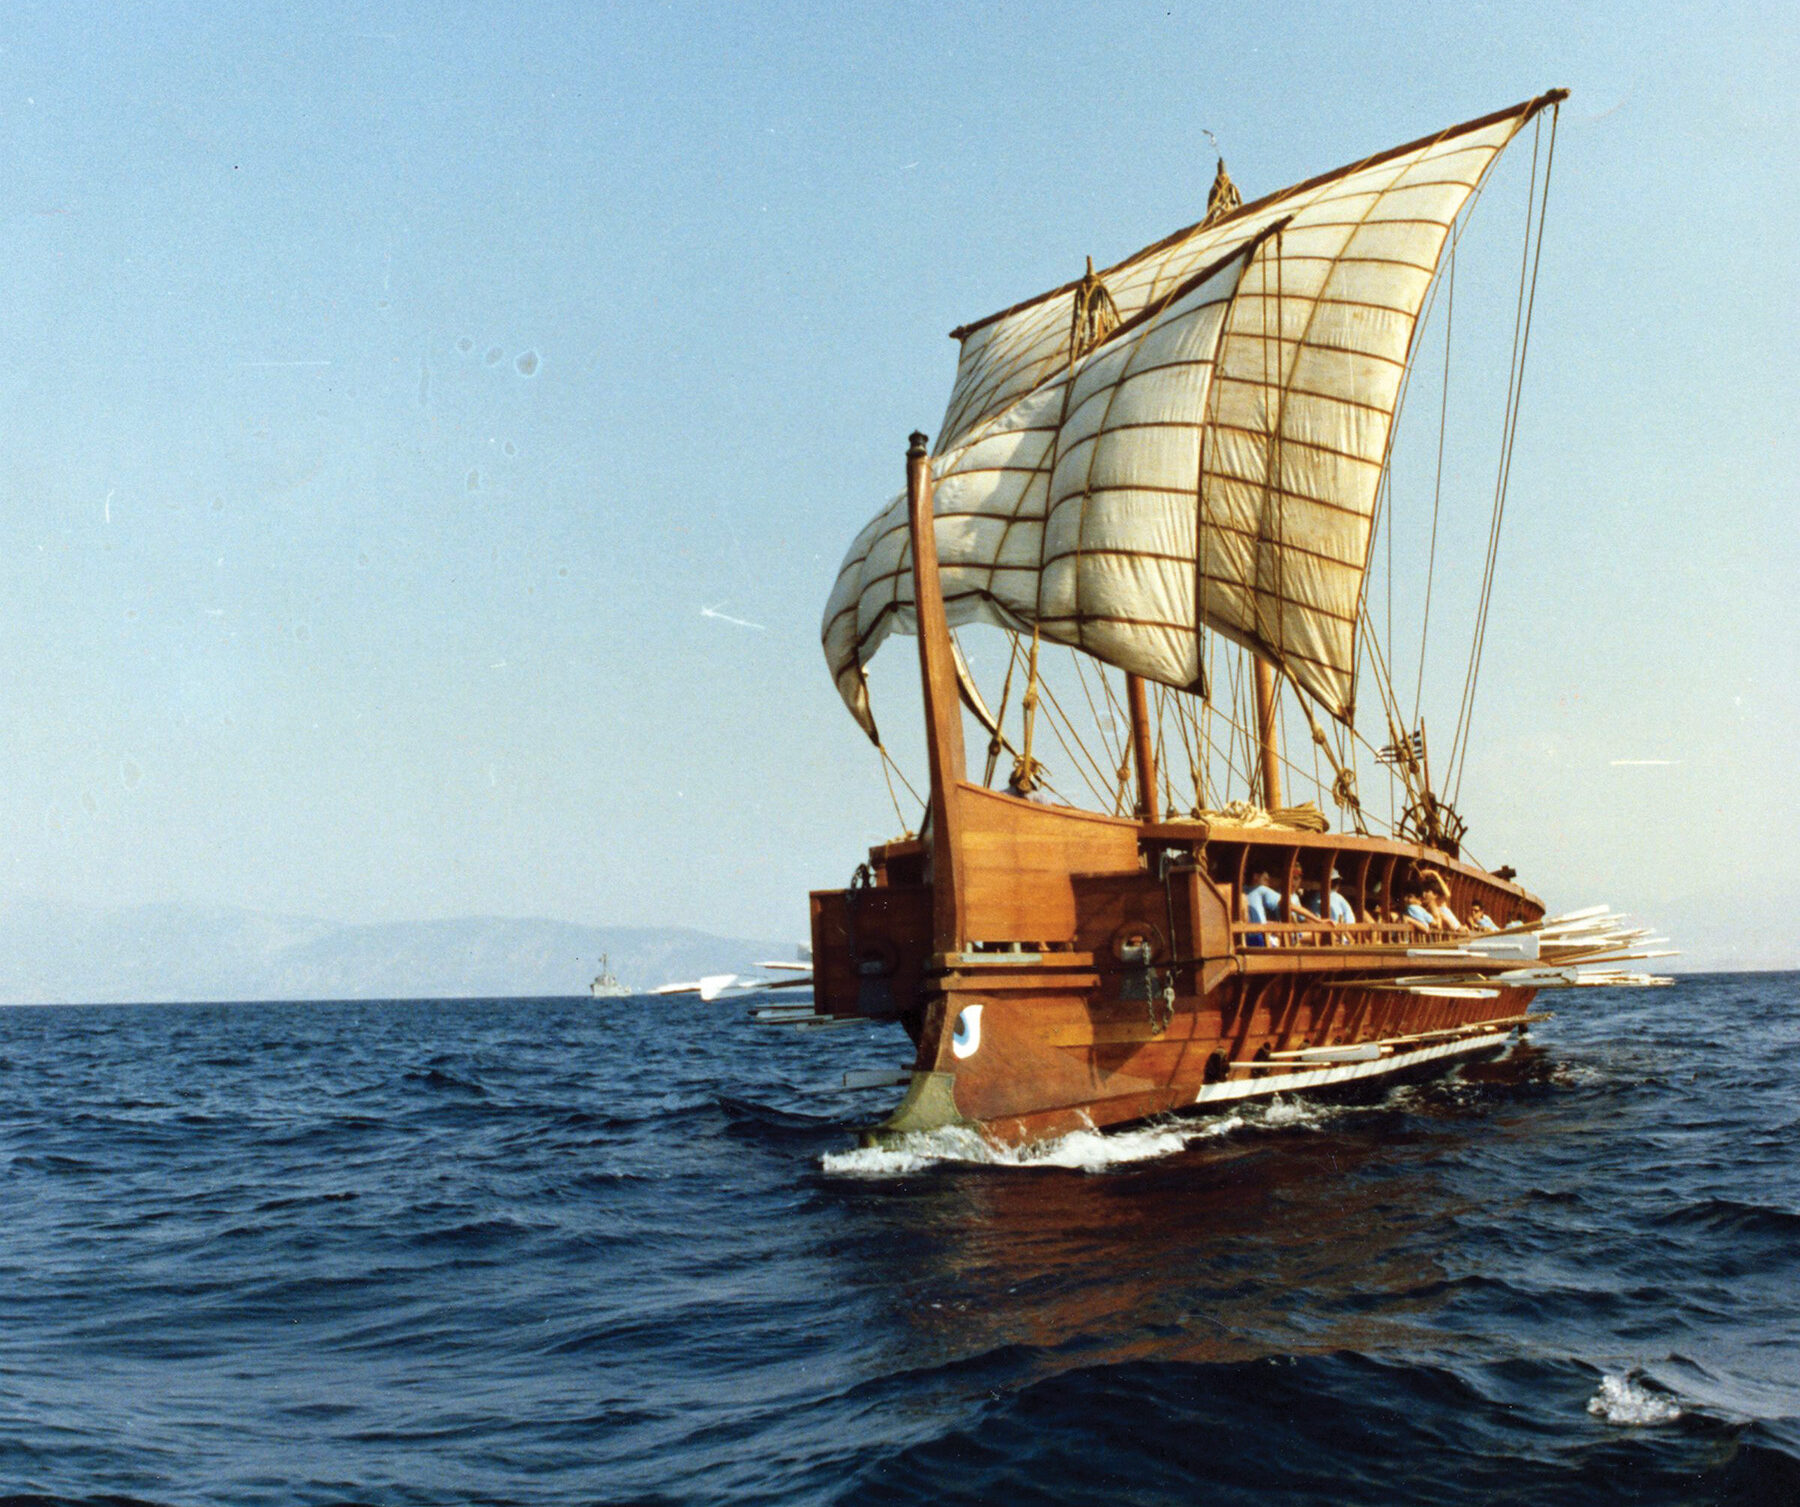 The Olympias is an accurate reproduction of an Athenian trireme owned by the Greek Navy. Triremes were designed for fast attack with ramming speeds up to 30 miles per hour.